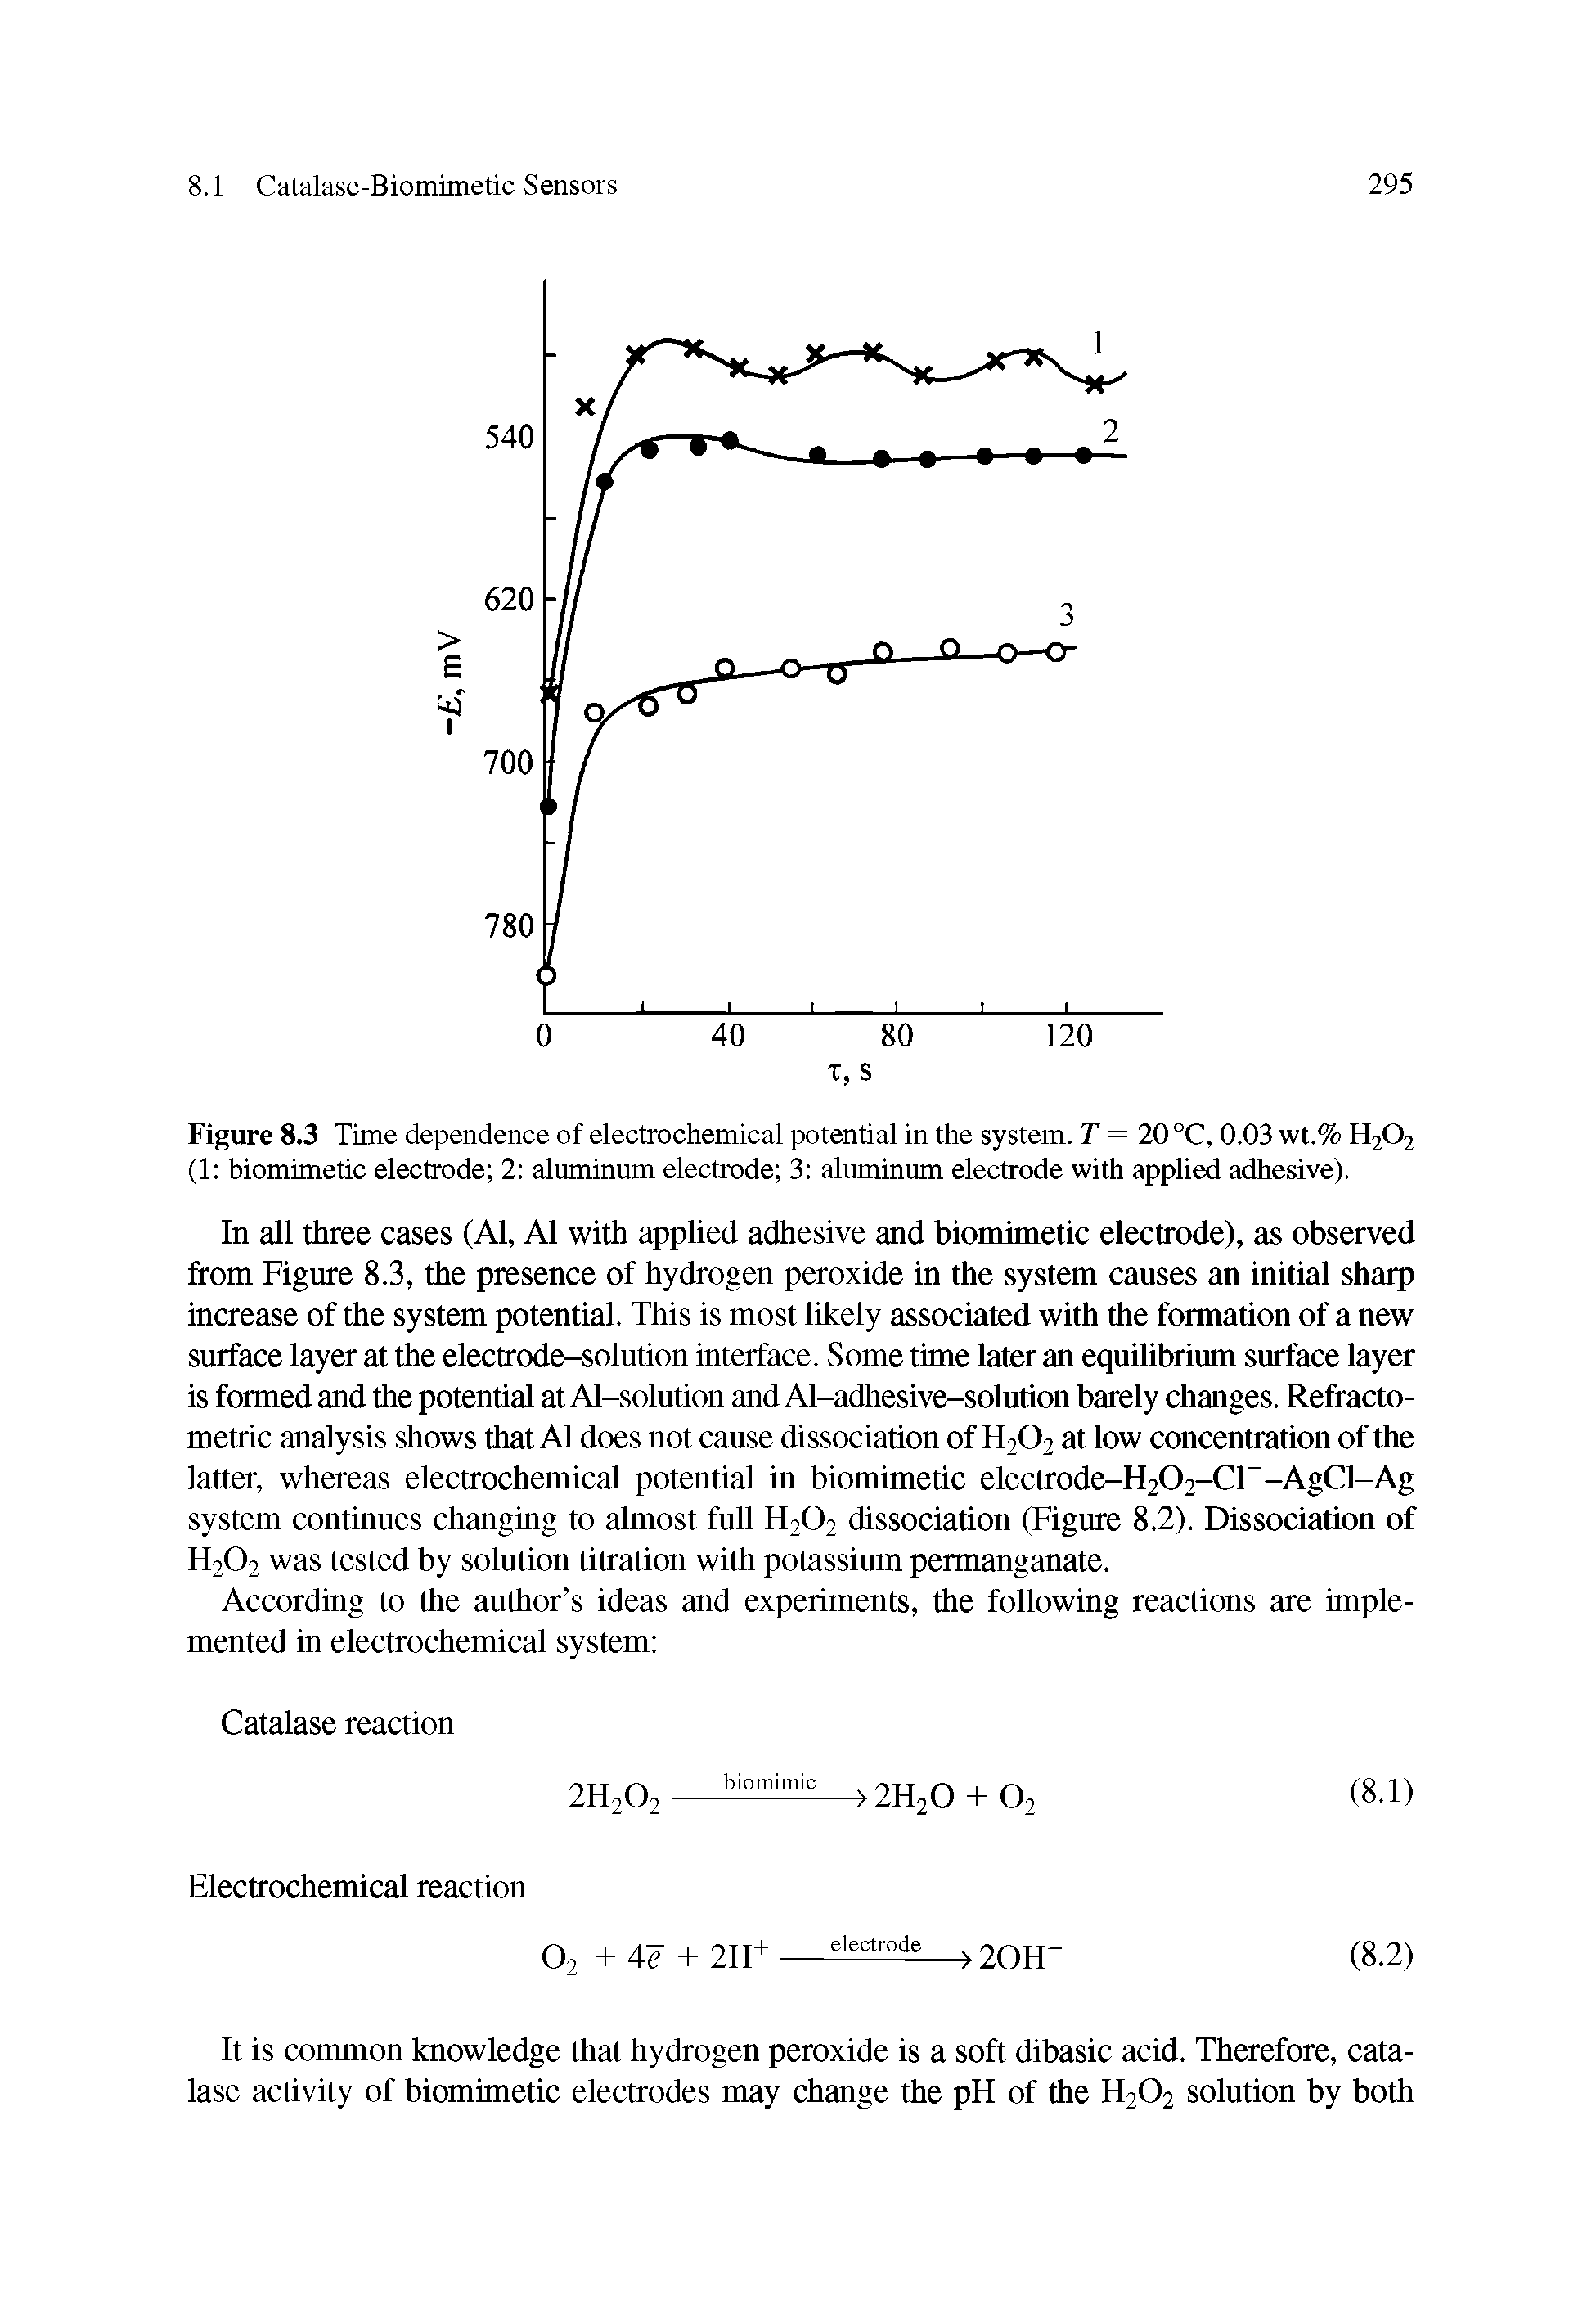 Figure 8.3 Time dependence of electrochemical potential in the system. T = 20 °C, 0.03 wt.% H202 (1 biomimetic electrode 2 aluminum electrode 3 aluminum electrode with applied adhesive).